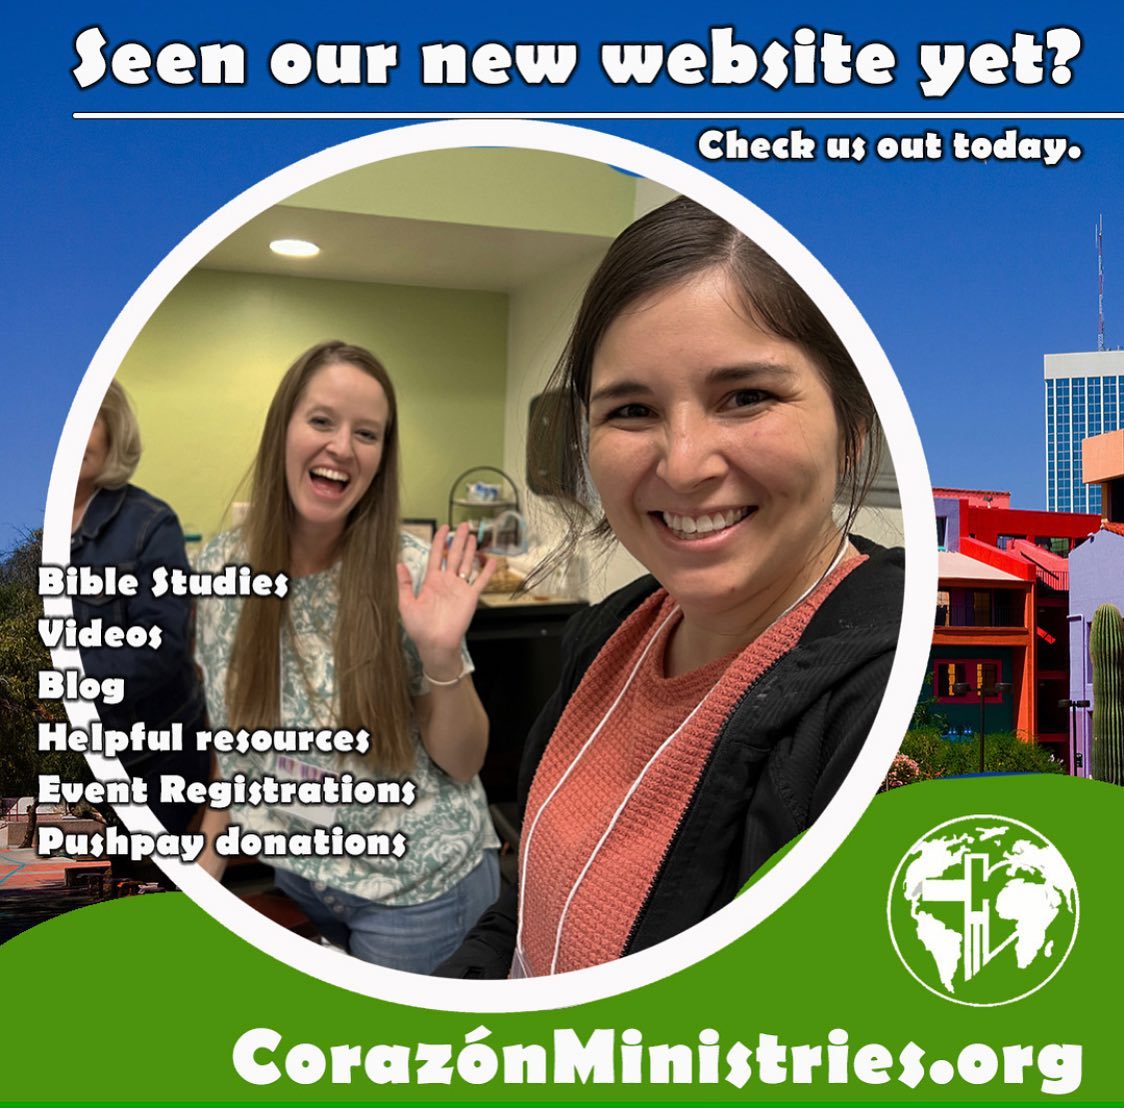 Have you seen our website lately? Check out our new site - designed with you in mind. Get more articles, more events and more Bible studies. Visit us at CorazonMinistries.org to learn more.